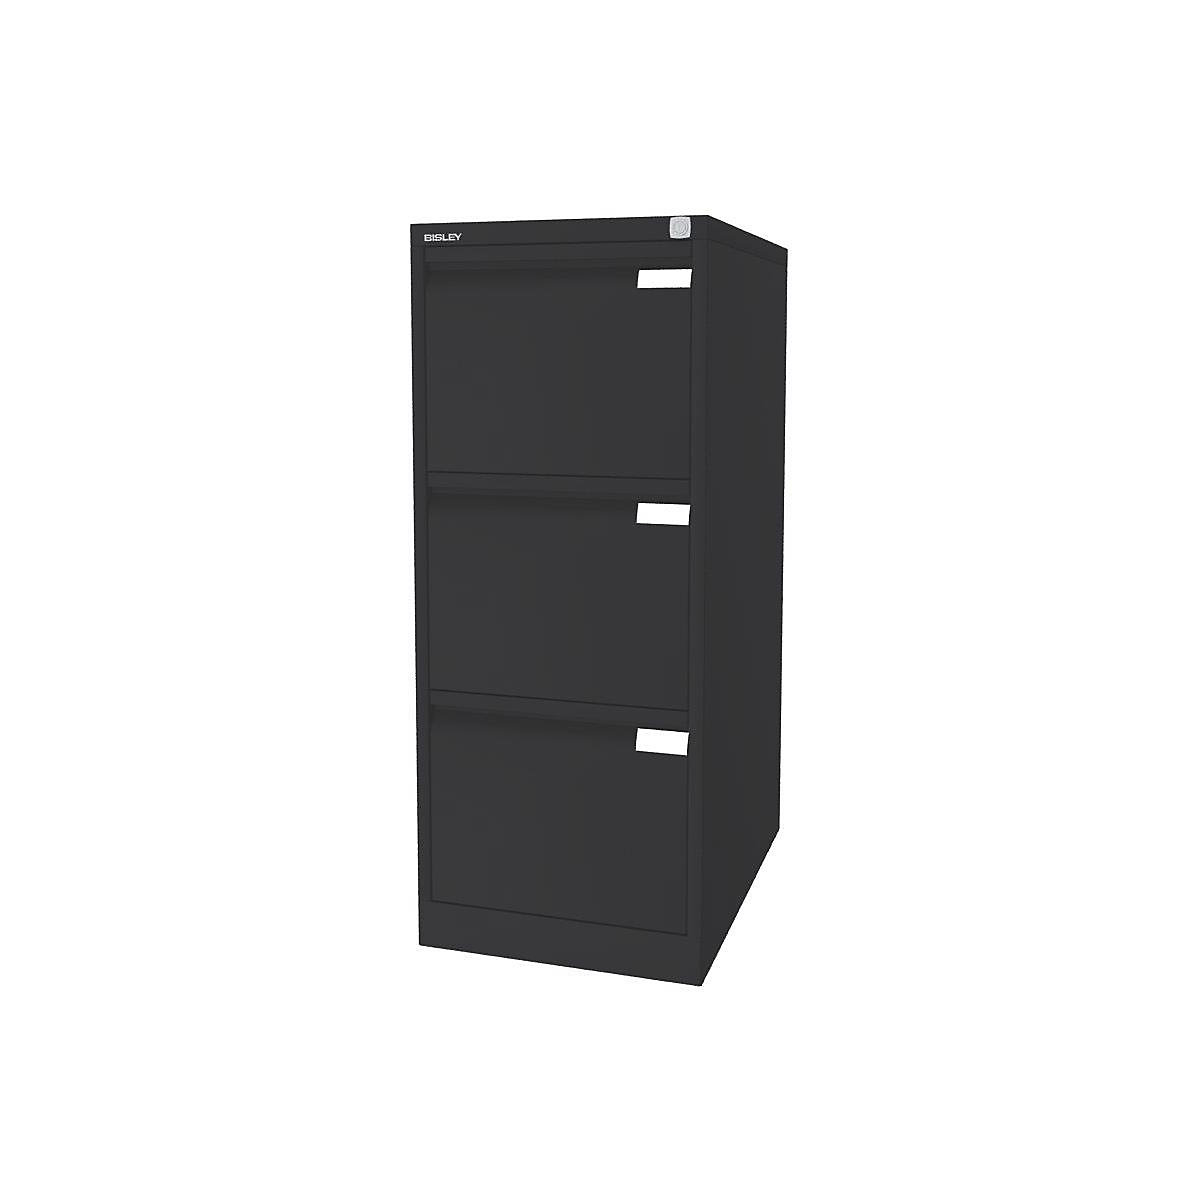 Suspension file cabinet, 1-track – BISLEY, 3 A4 drawers, charcoal-12